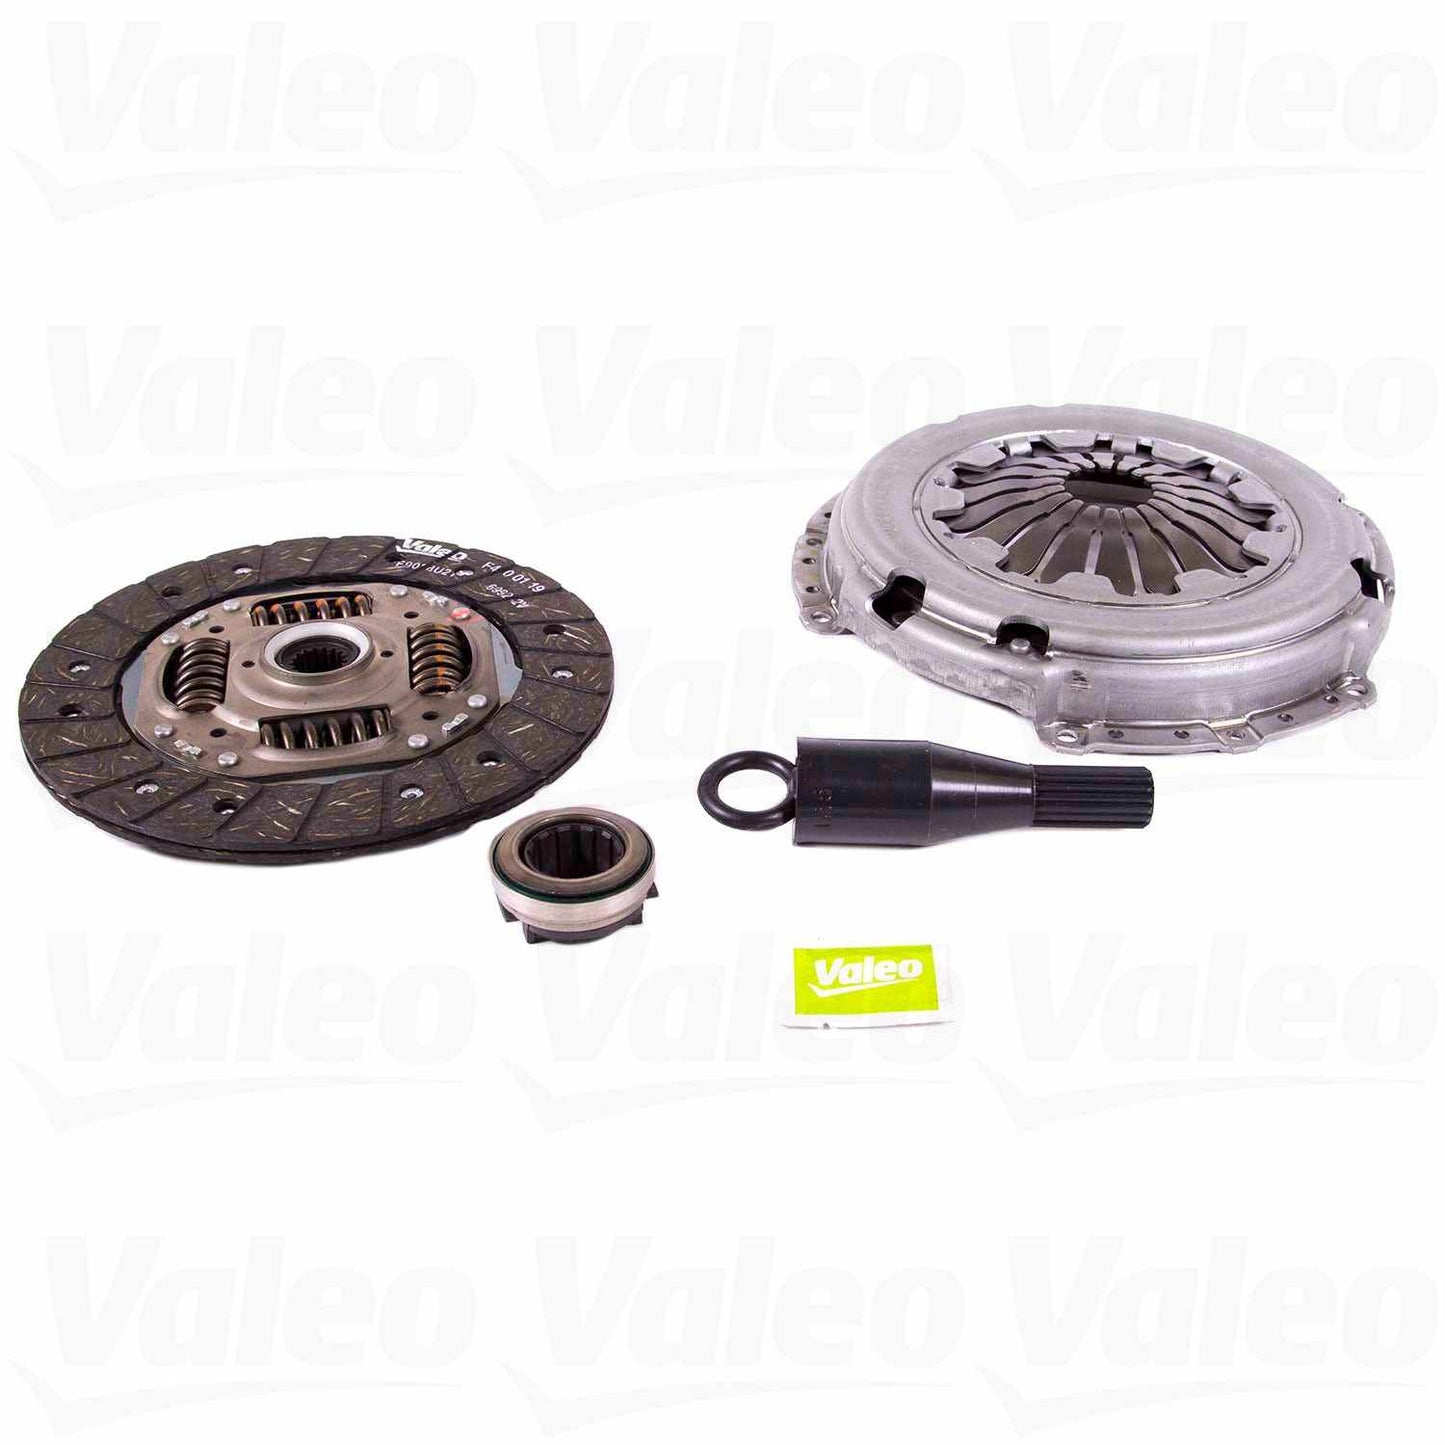 Front View of Transmission Clutch Kit VALEO 52001202